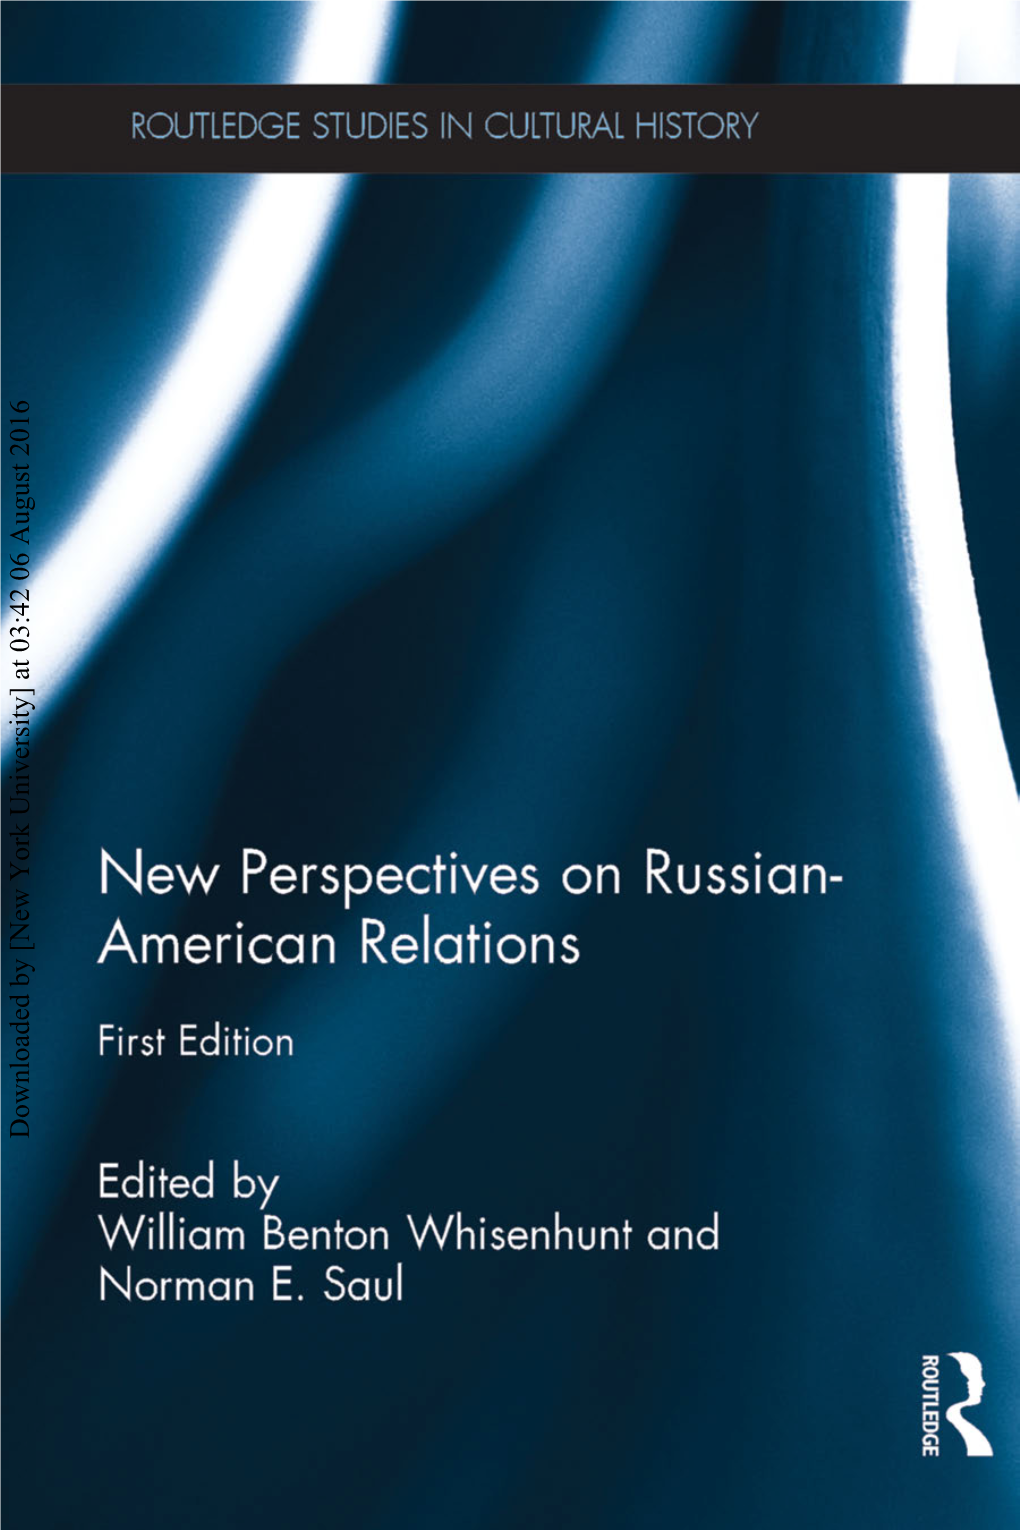 Downloaded by [New York University] at 03:42 06 August 2016 New Perspectives on Russian-American Relations